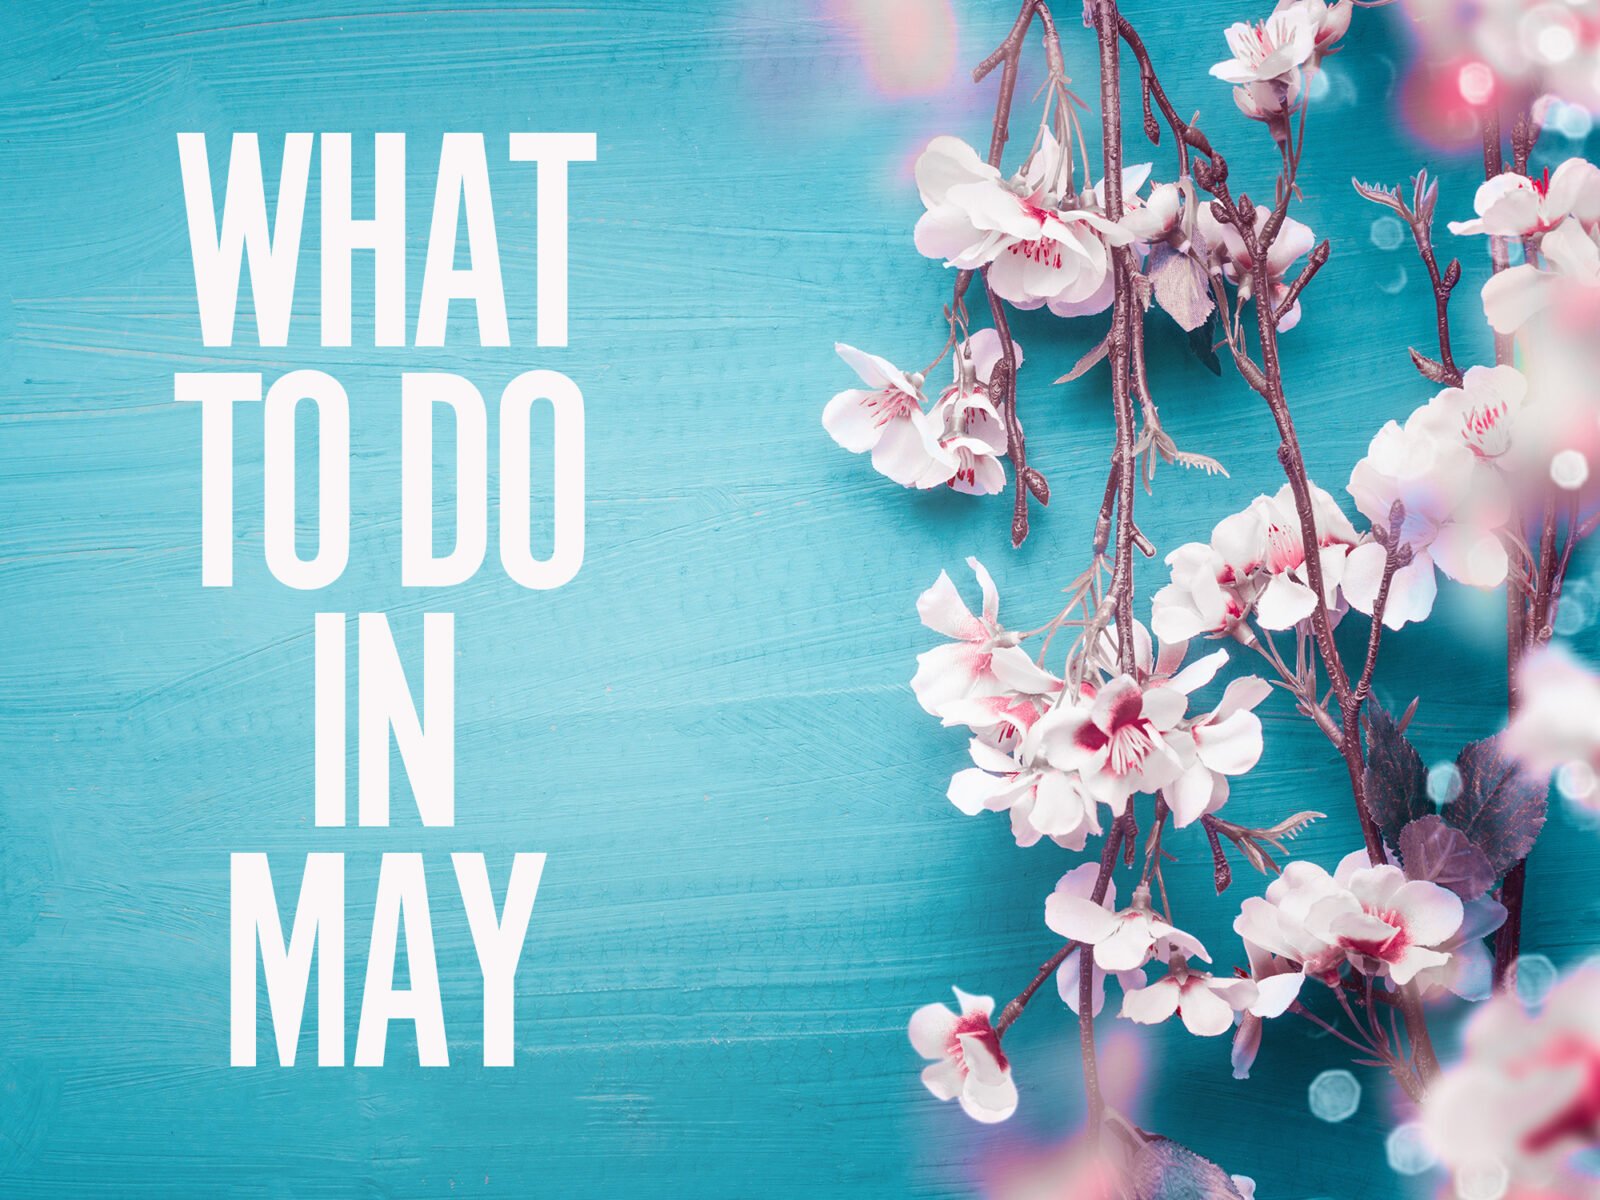 What to do in May